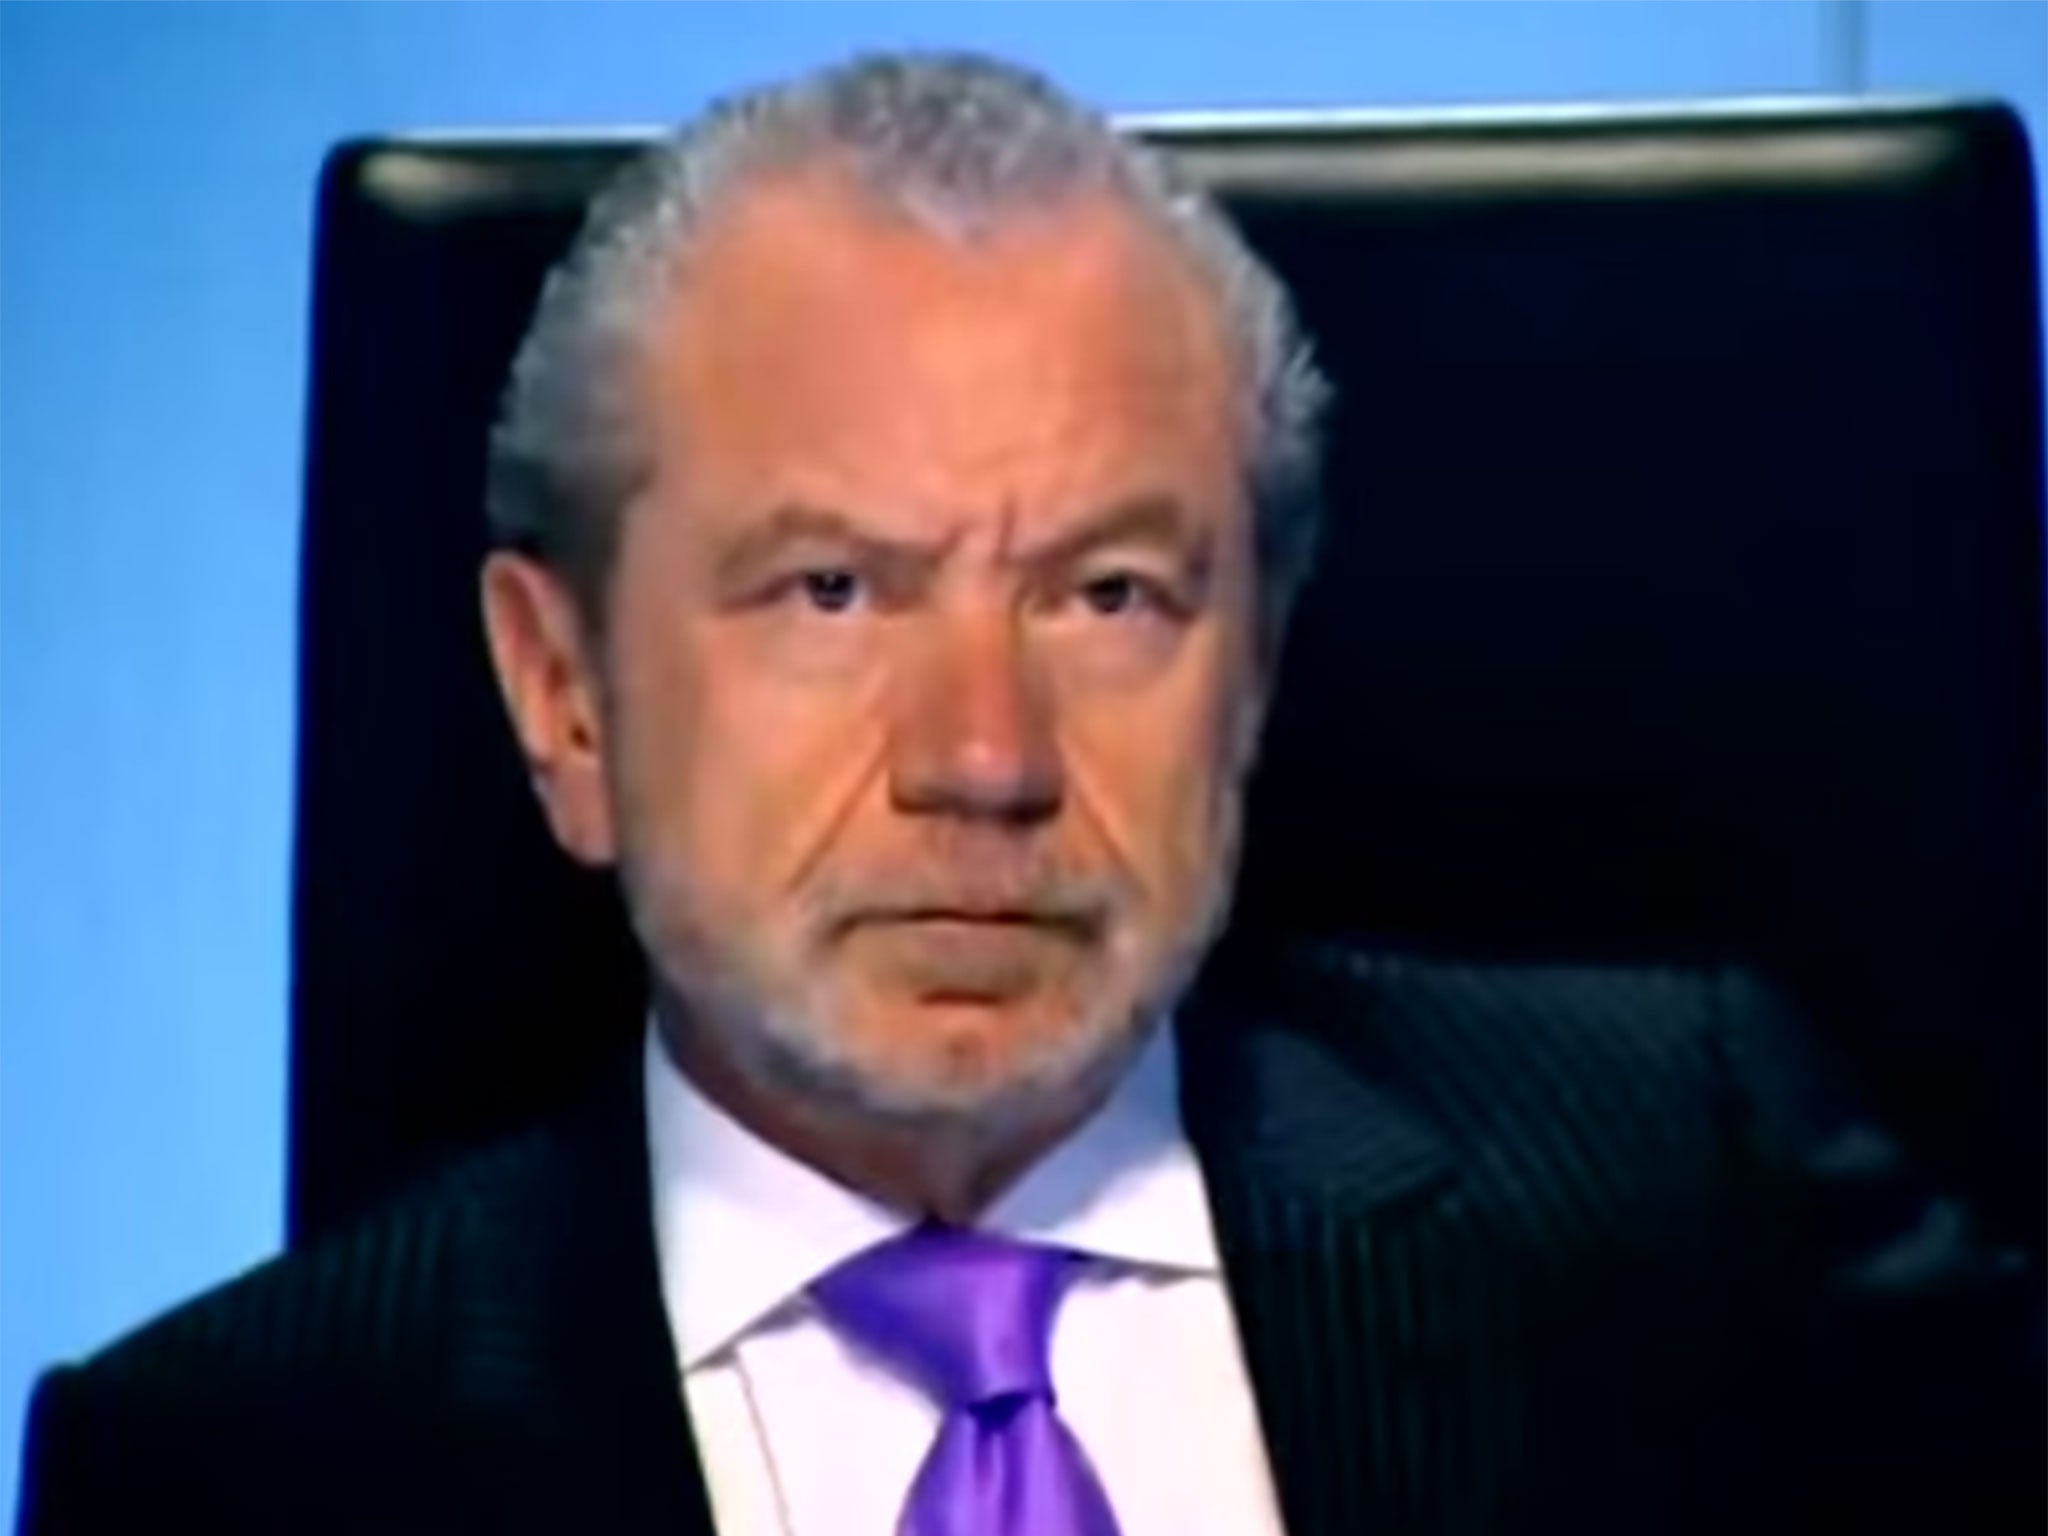 Sir Alan Sugar appearing in a shot from Apprentice which was used in a Cassette Boy mashup